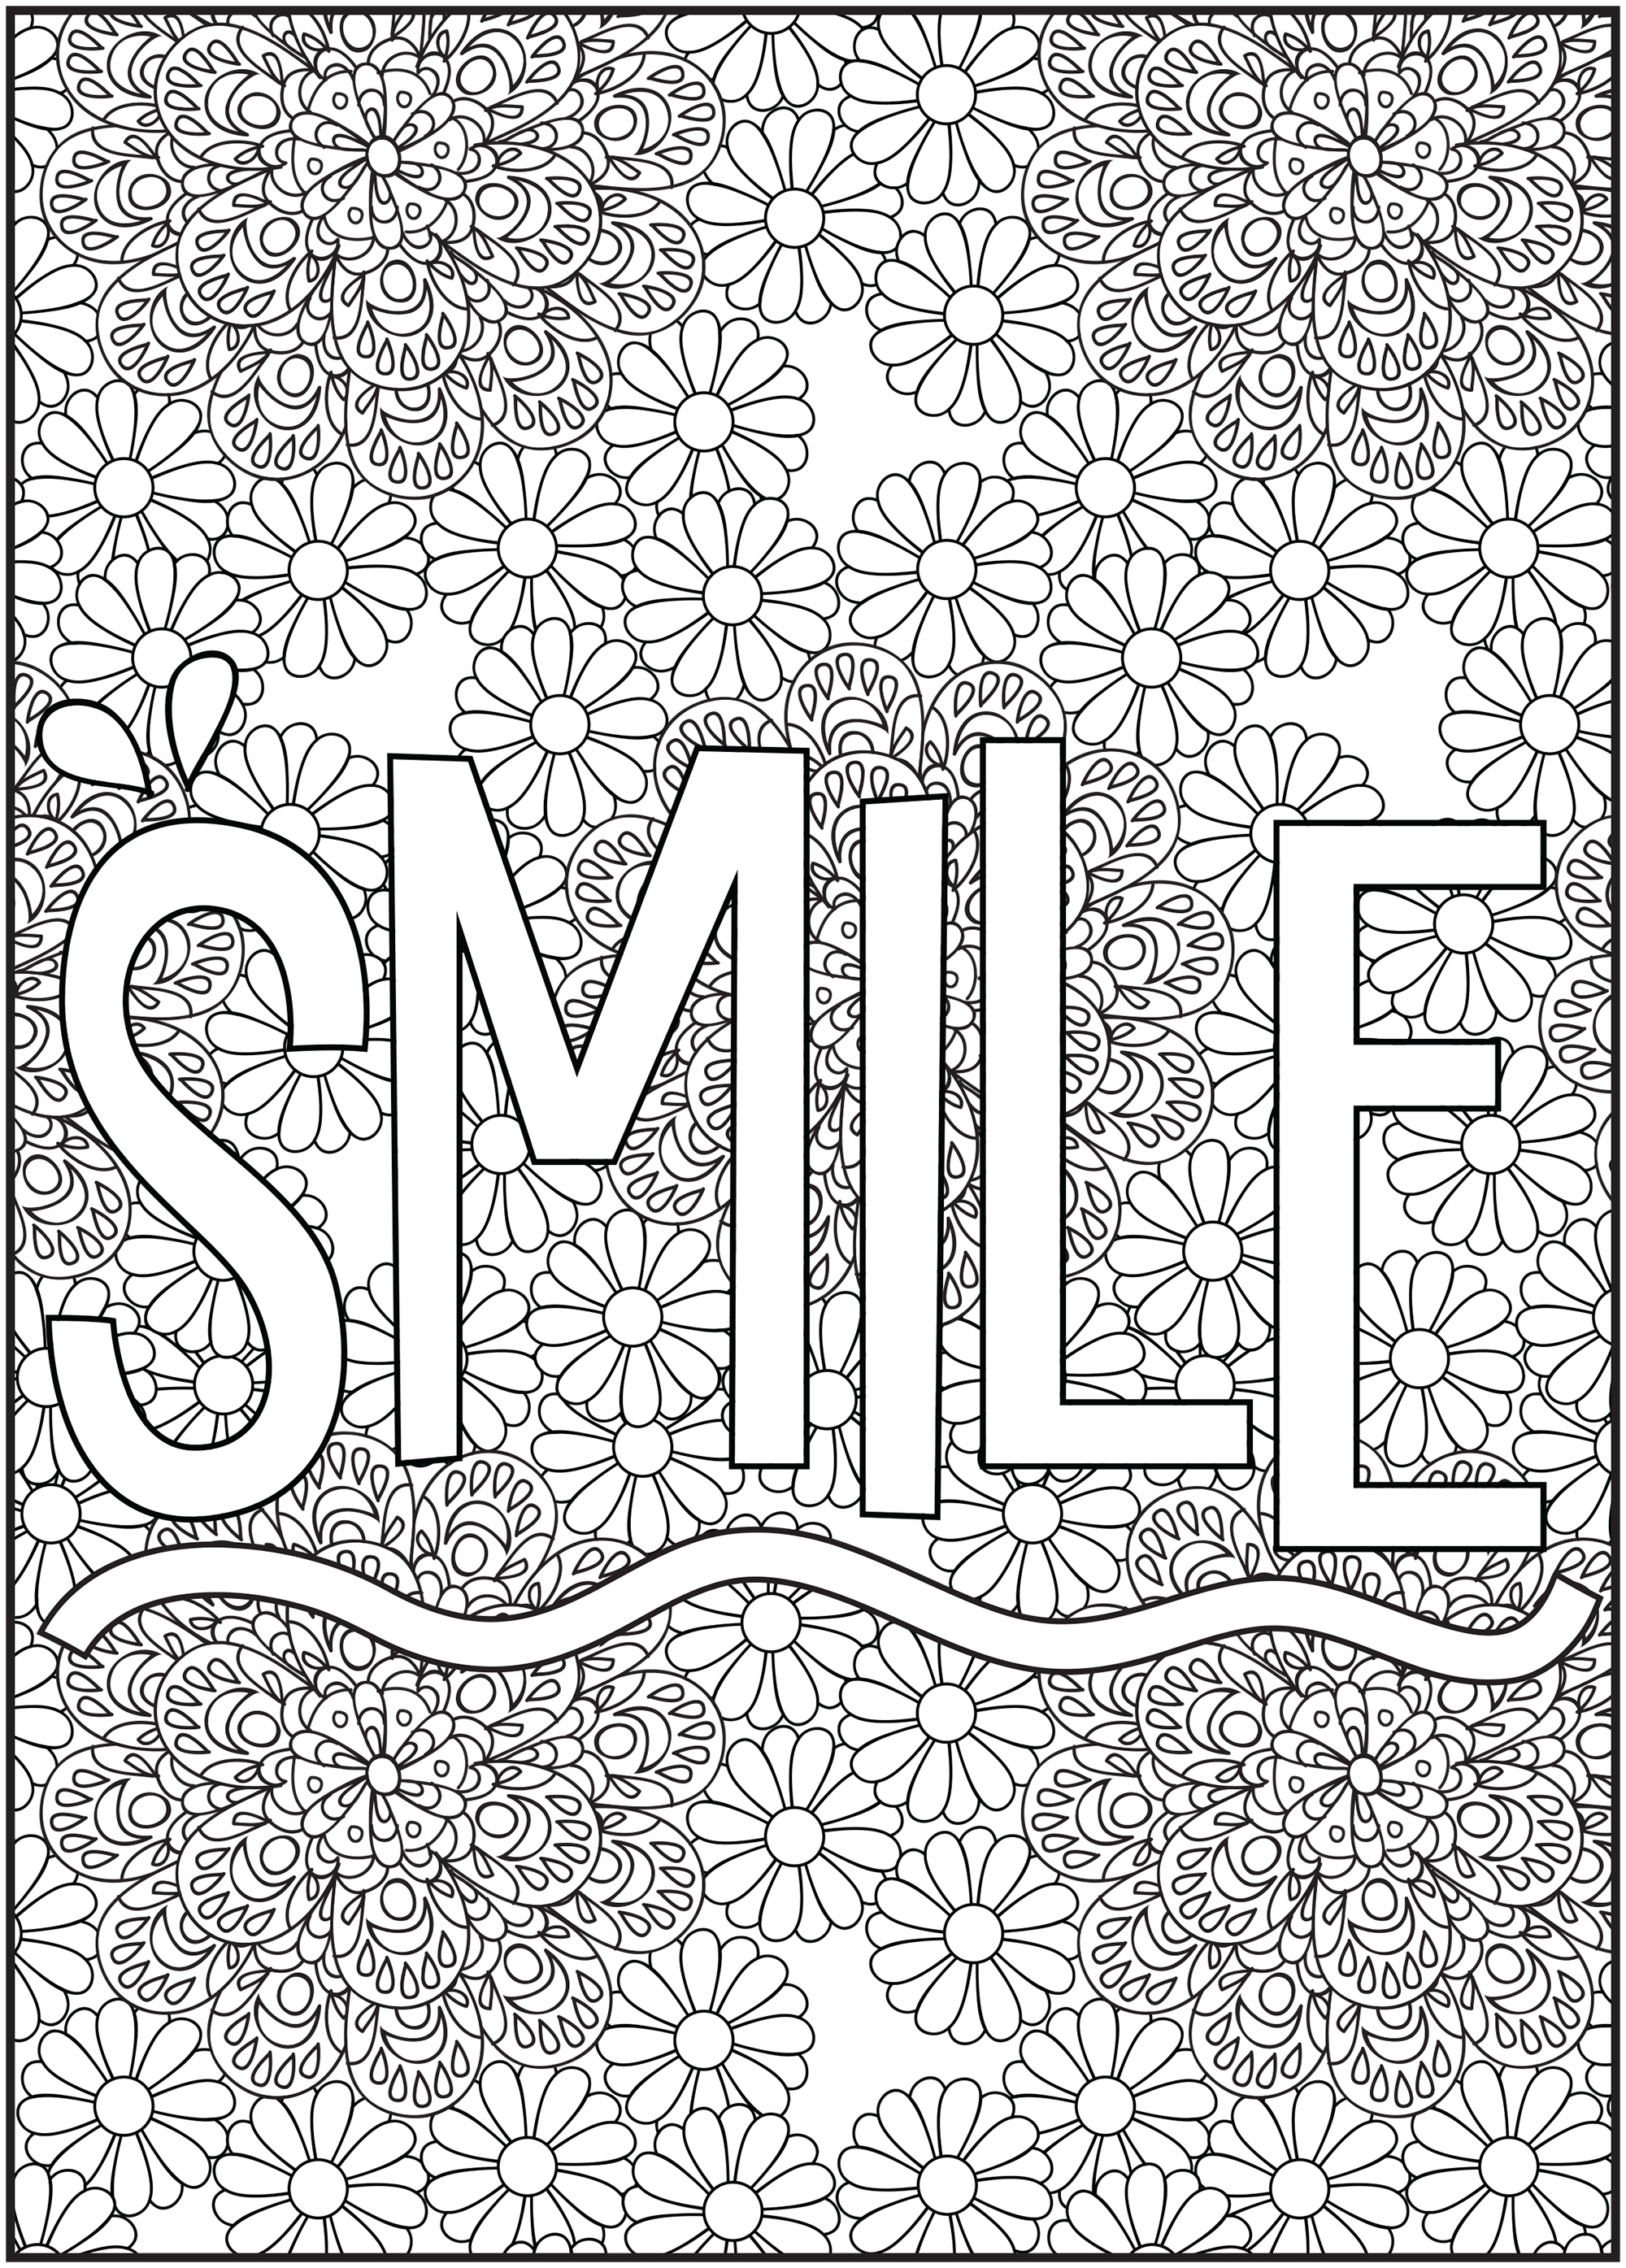 Cra-Z-Art Timeless Creations Adult Coloring Book, Words to Color by, 64 Pages - image 4 of 11